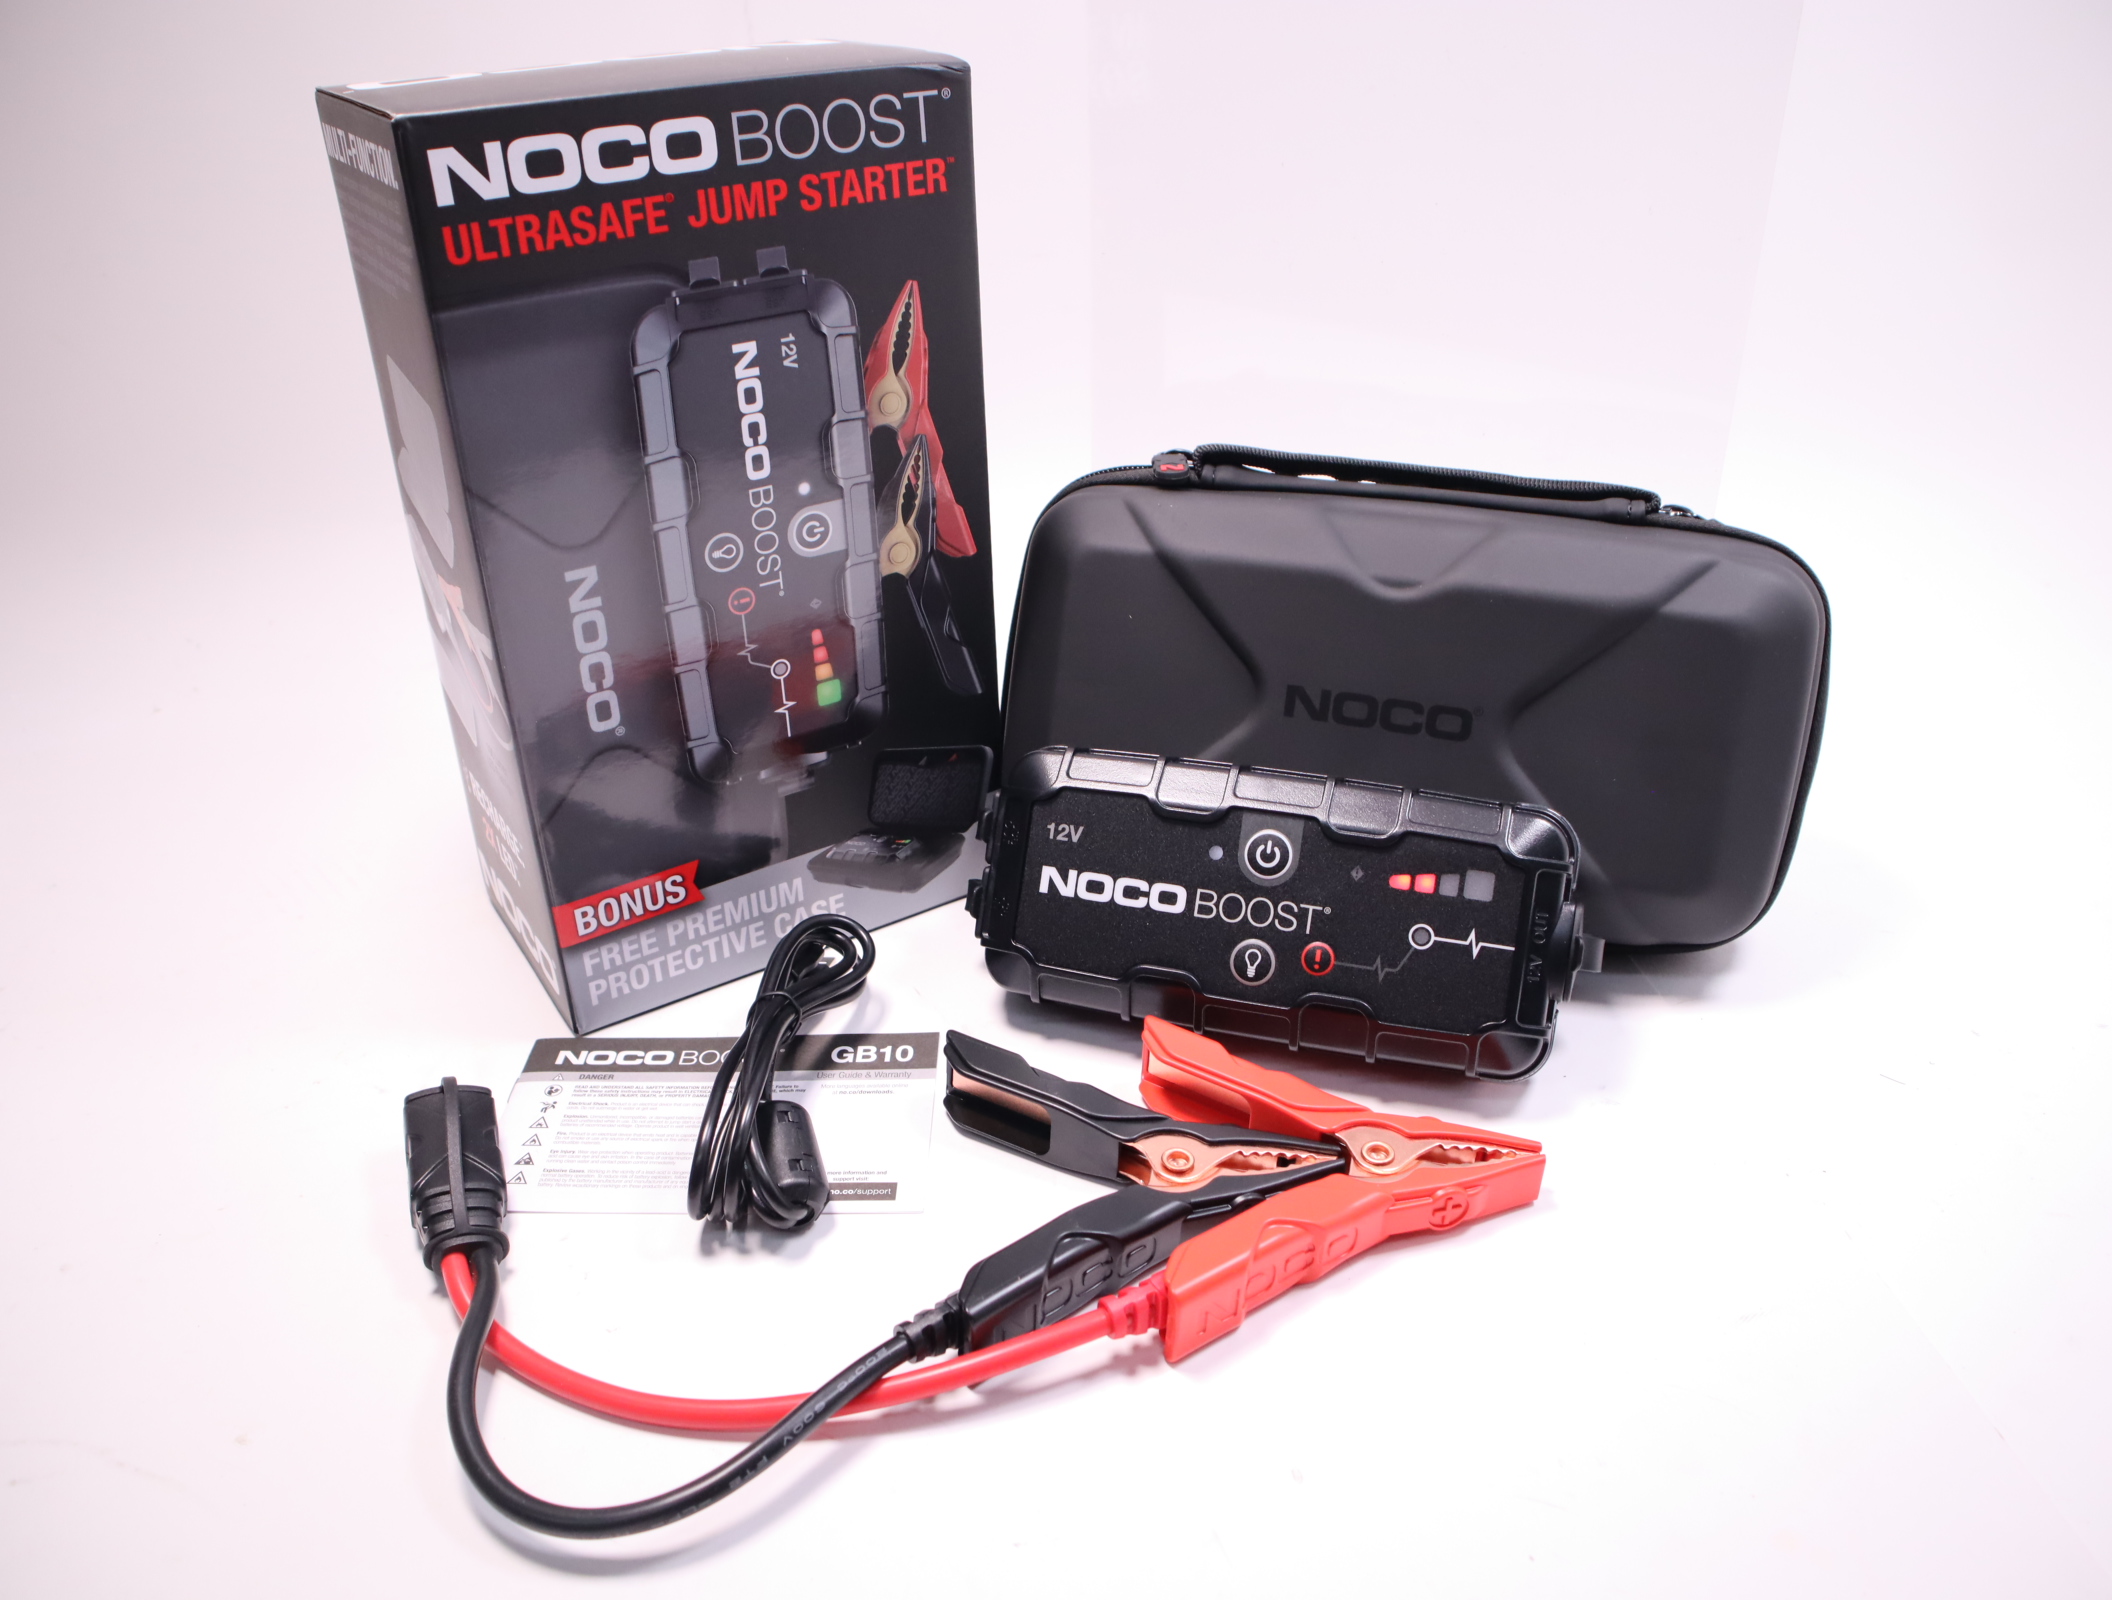 NOCO Boost Ultra Safe Lithium Jump Starters